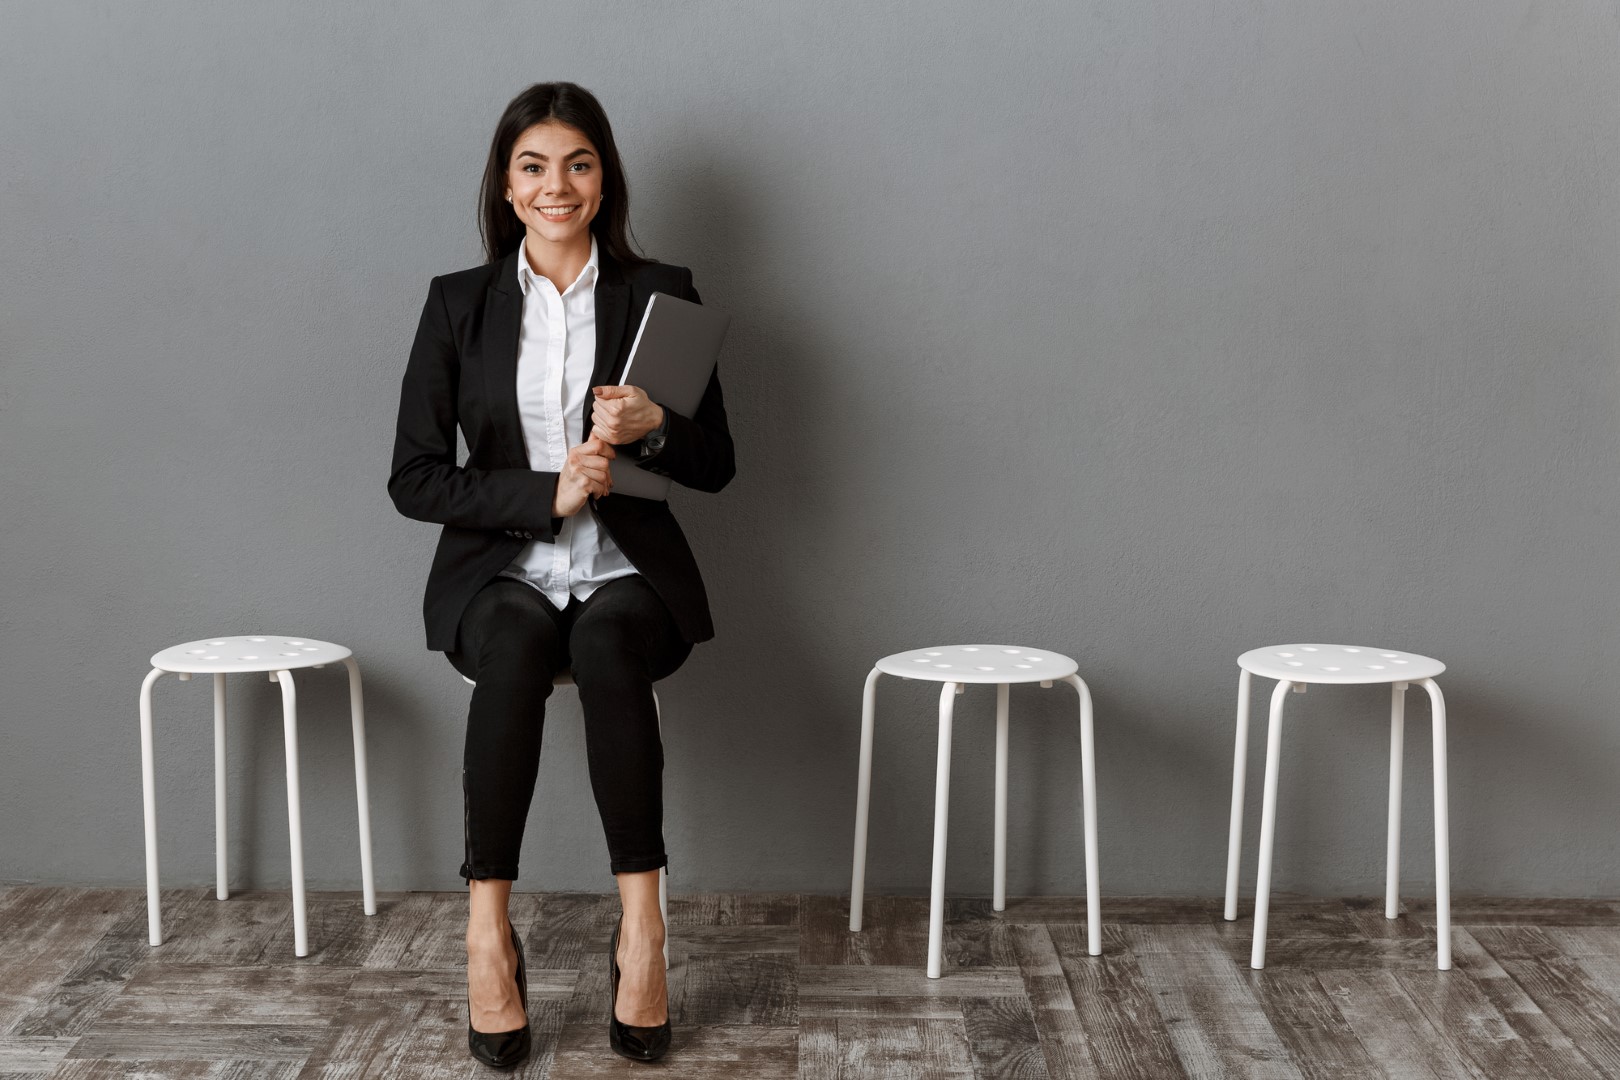 How to Prepare for Your Upcoming Interview